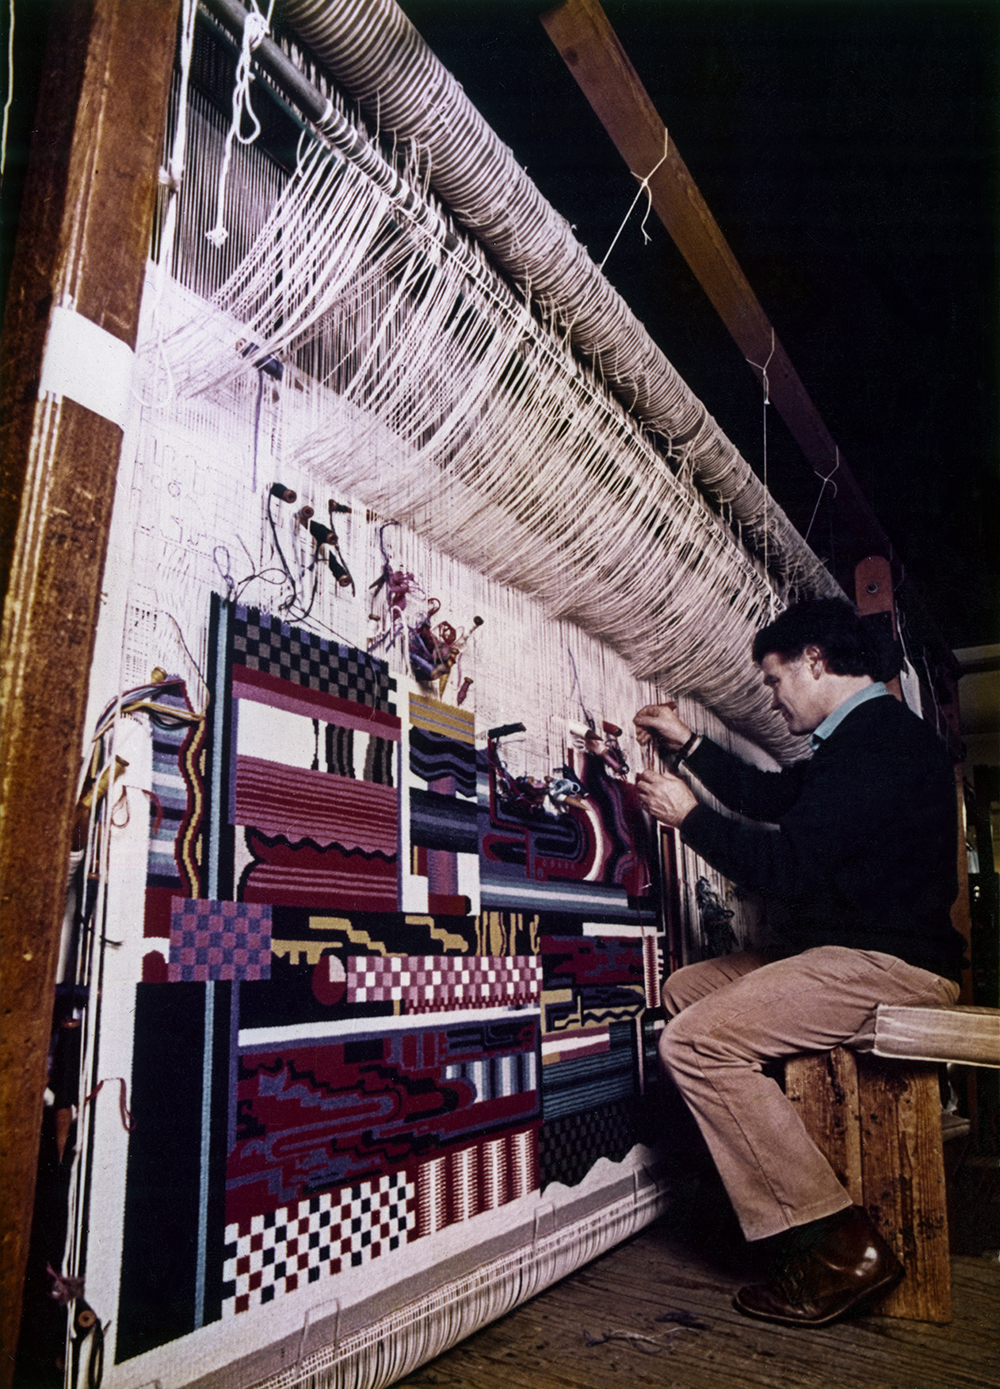 Archie Weaving Whitworth, Paolozzi Tapestry circa 1967. Image courtesy of Archie Brennan Estate - Entertainment News Scotland 